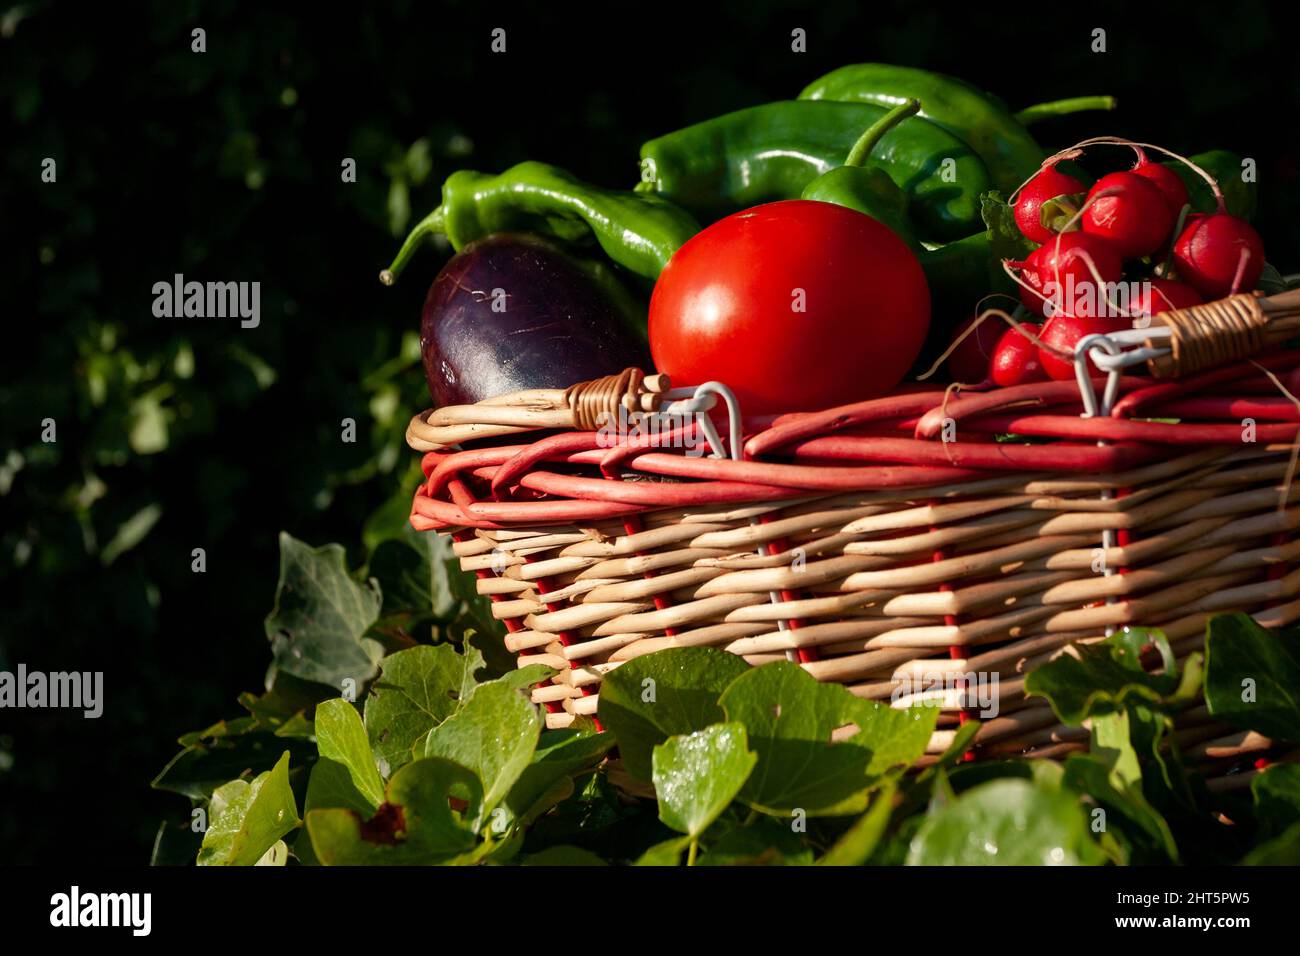 Basket with freshly picked vegetables on green leaves on a dark blurred background Stock Photo